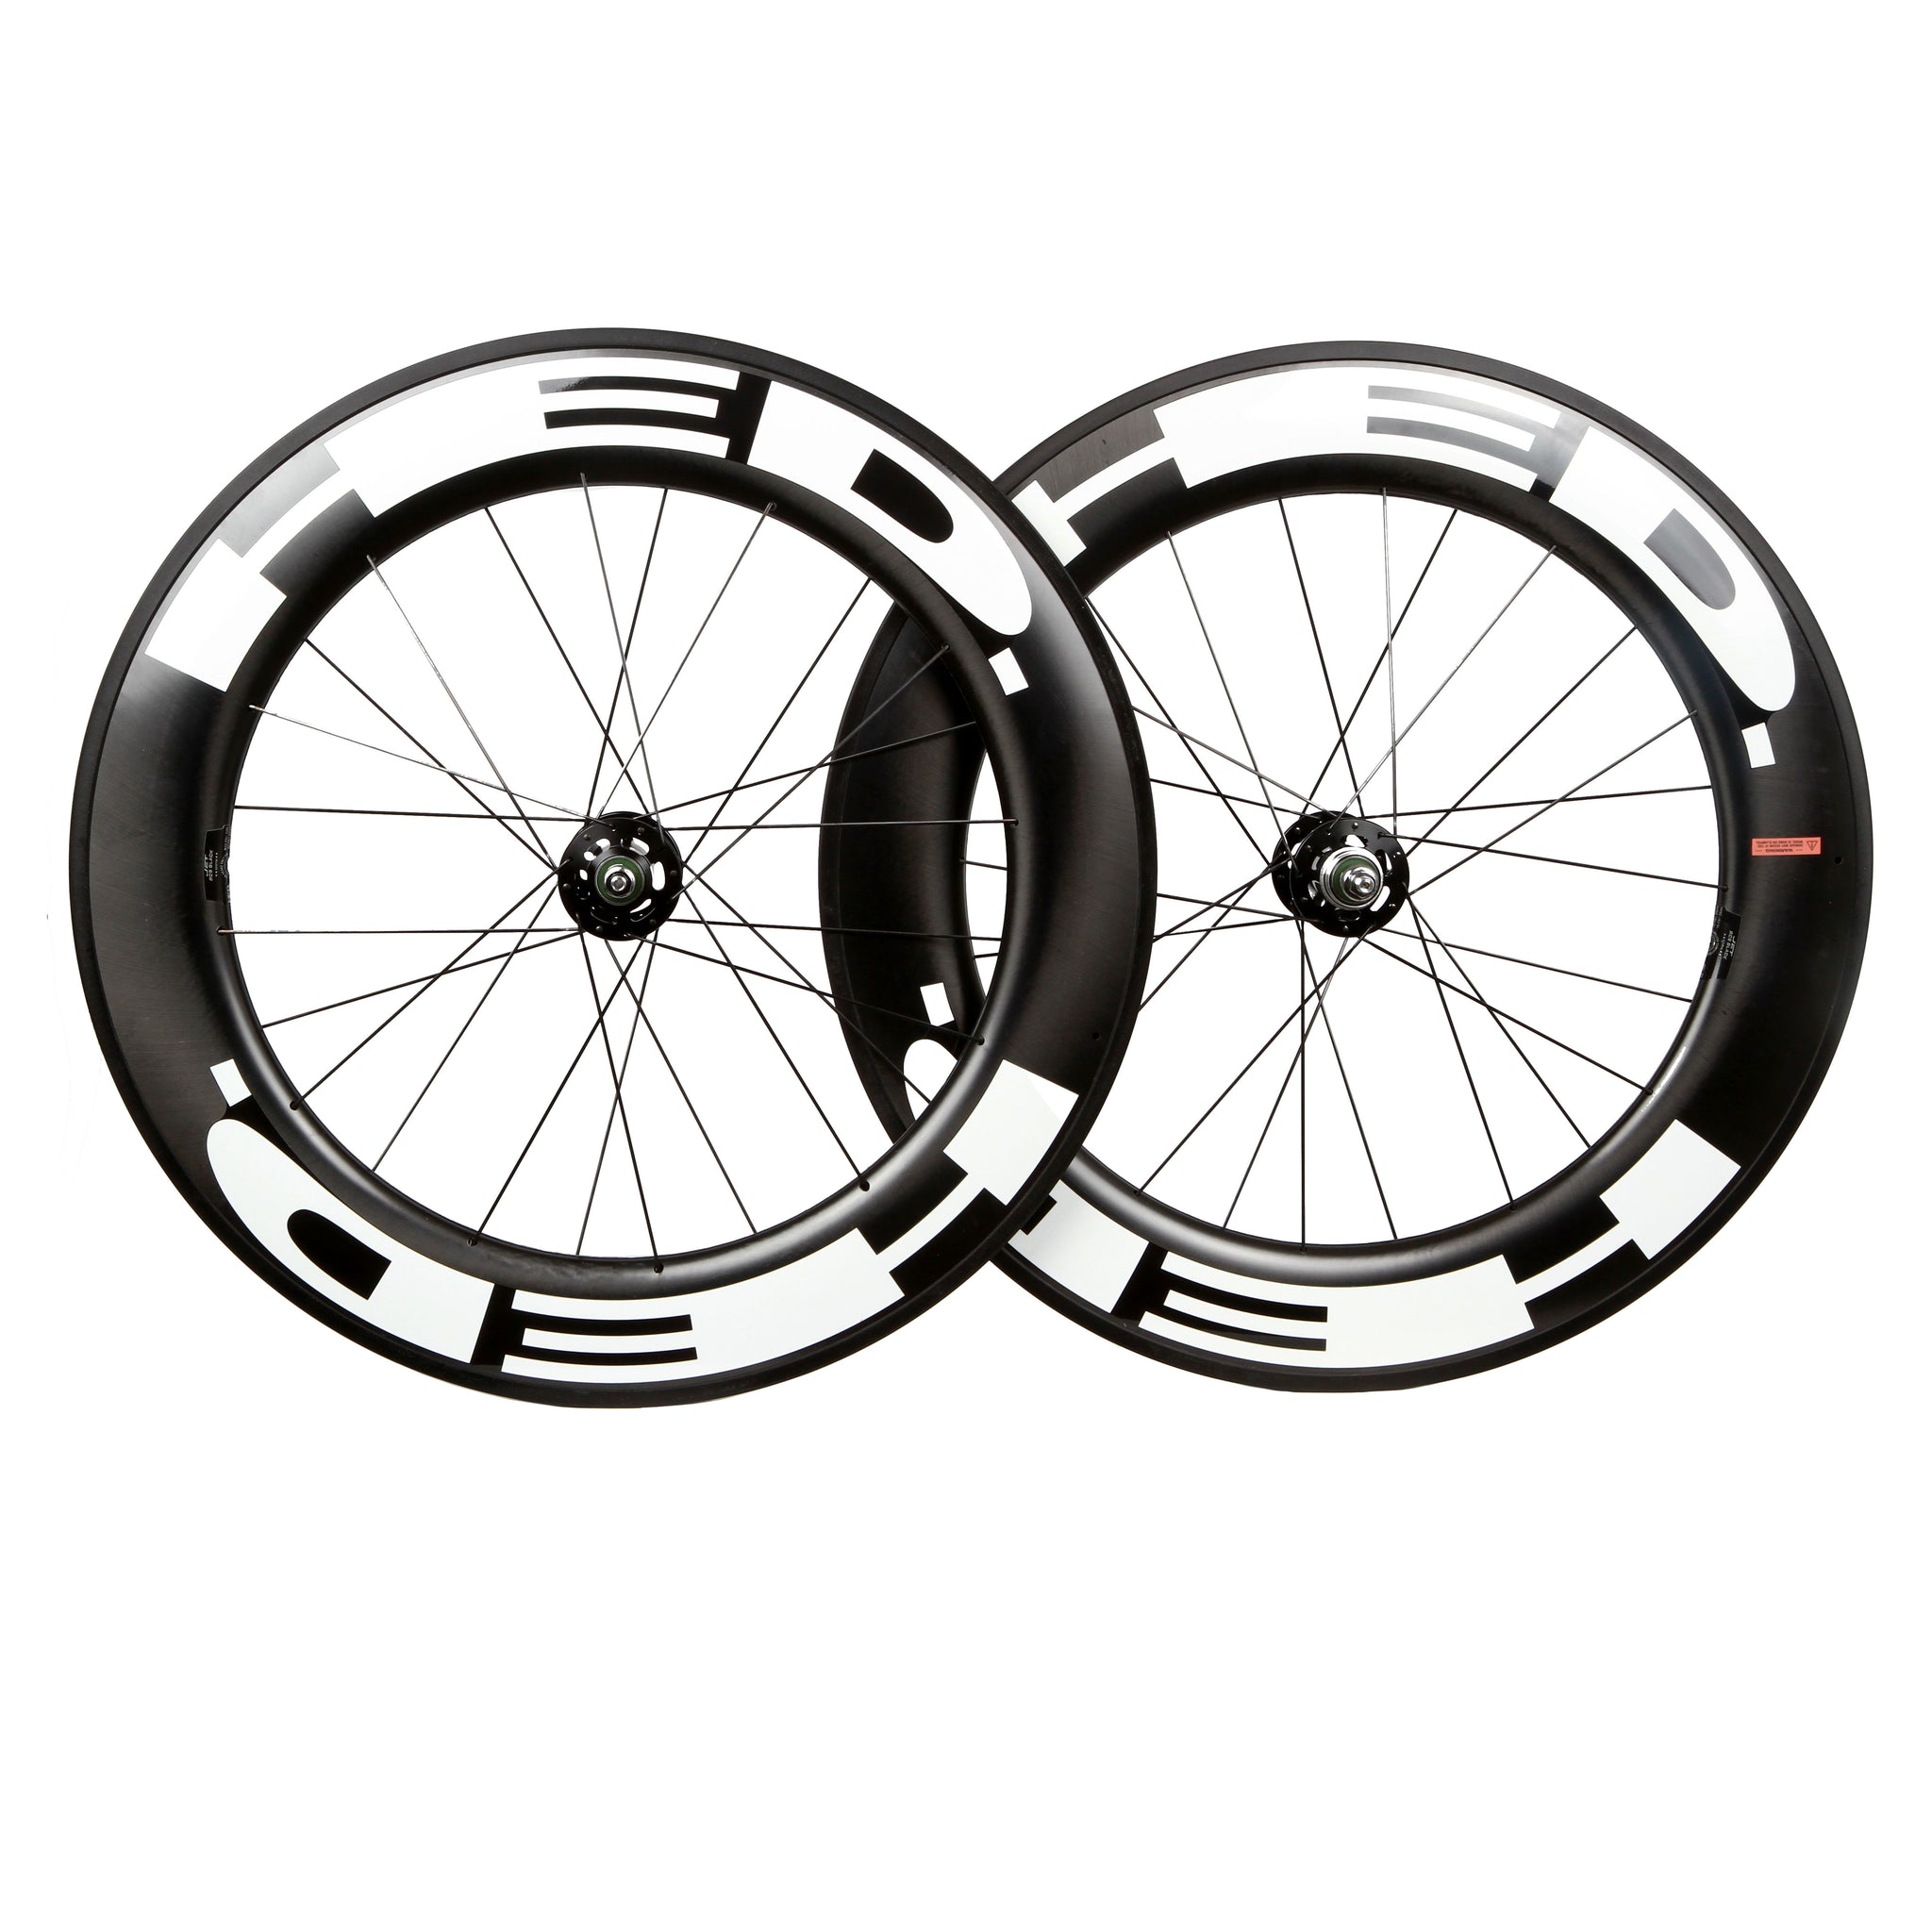 HED Jet 9 RC Black carbon track fixed gear wheelset – Retrogression